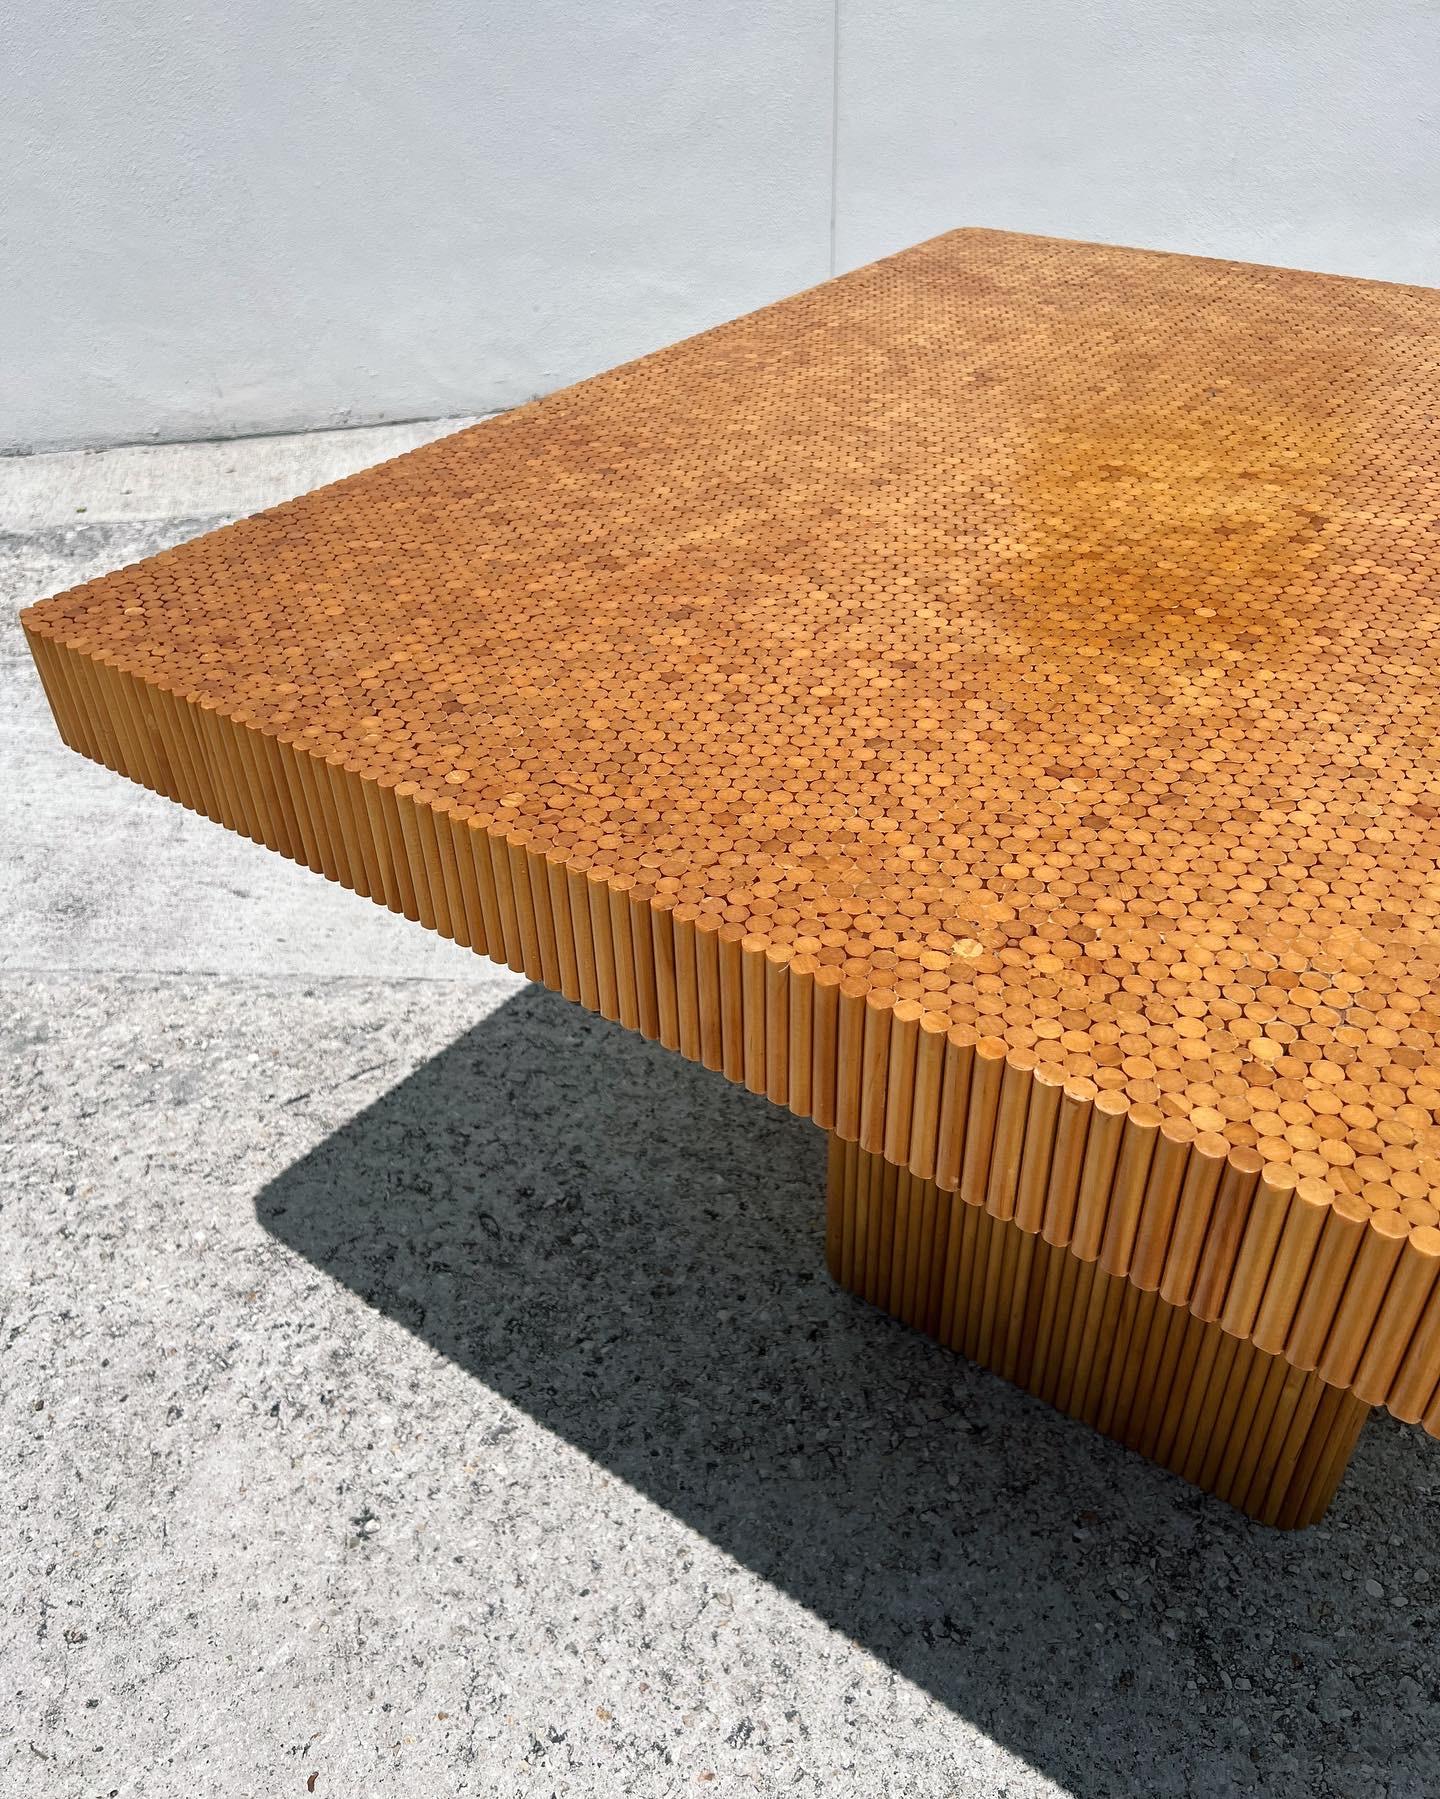 An Incredible dining table by American artist Ernest C. Masi hand crafted in the 1970’s. The table is comprised of individually placed maple dowels giving it a unique and organic aesthetic which can be seeing throughout the top. His doweled pieces